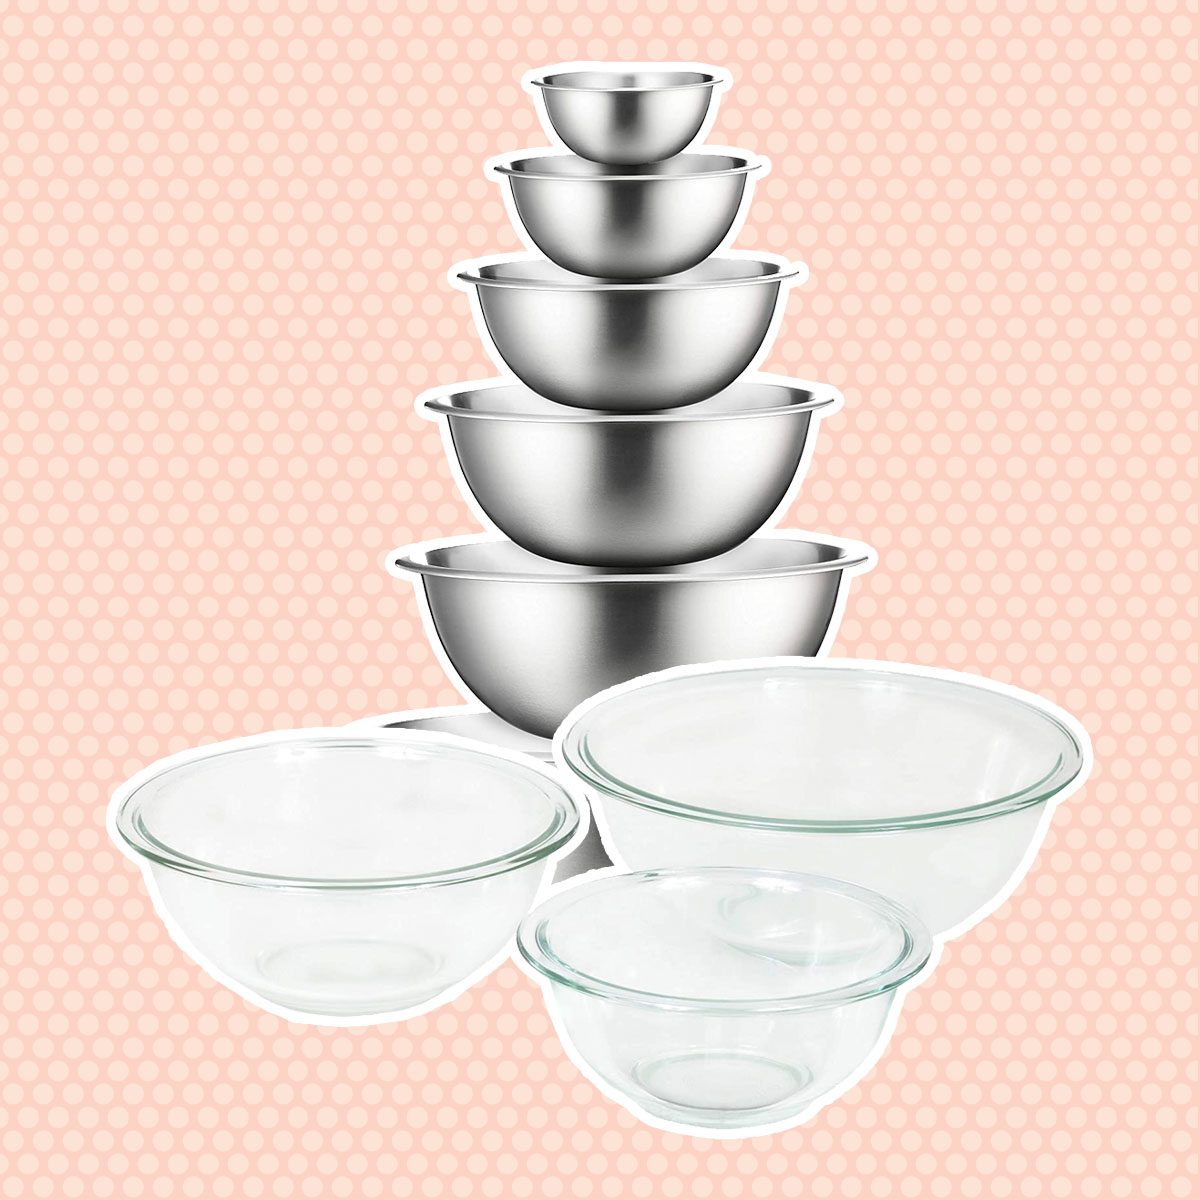 Stainless Steel or Glass Bowls